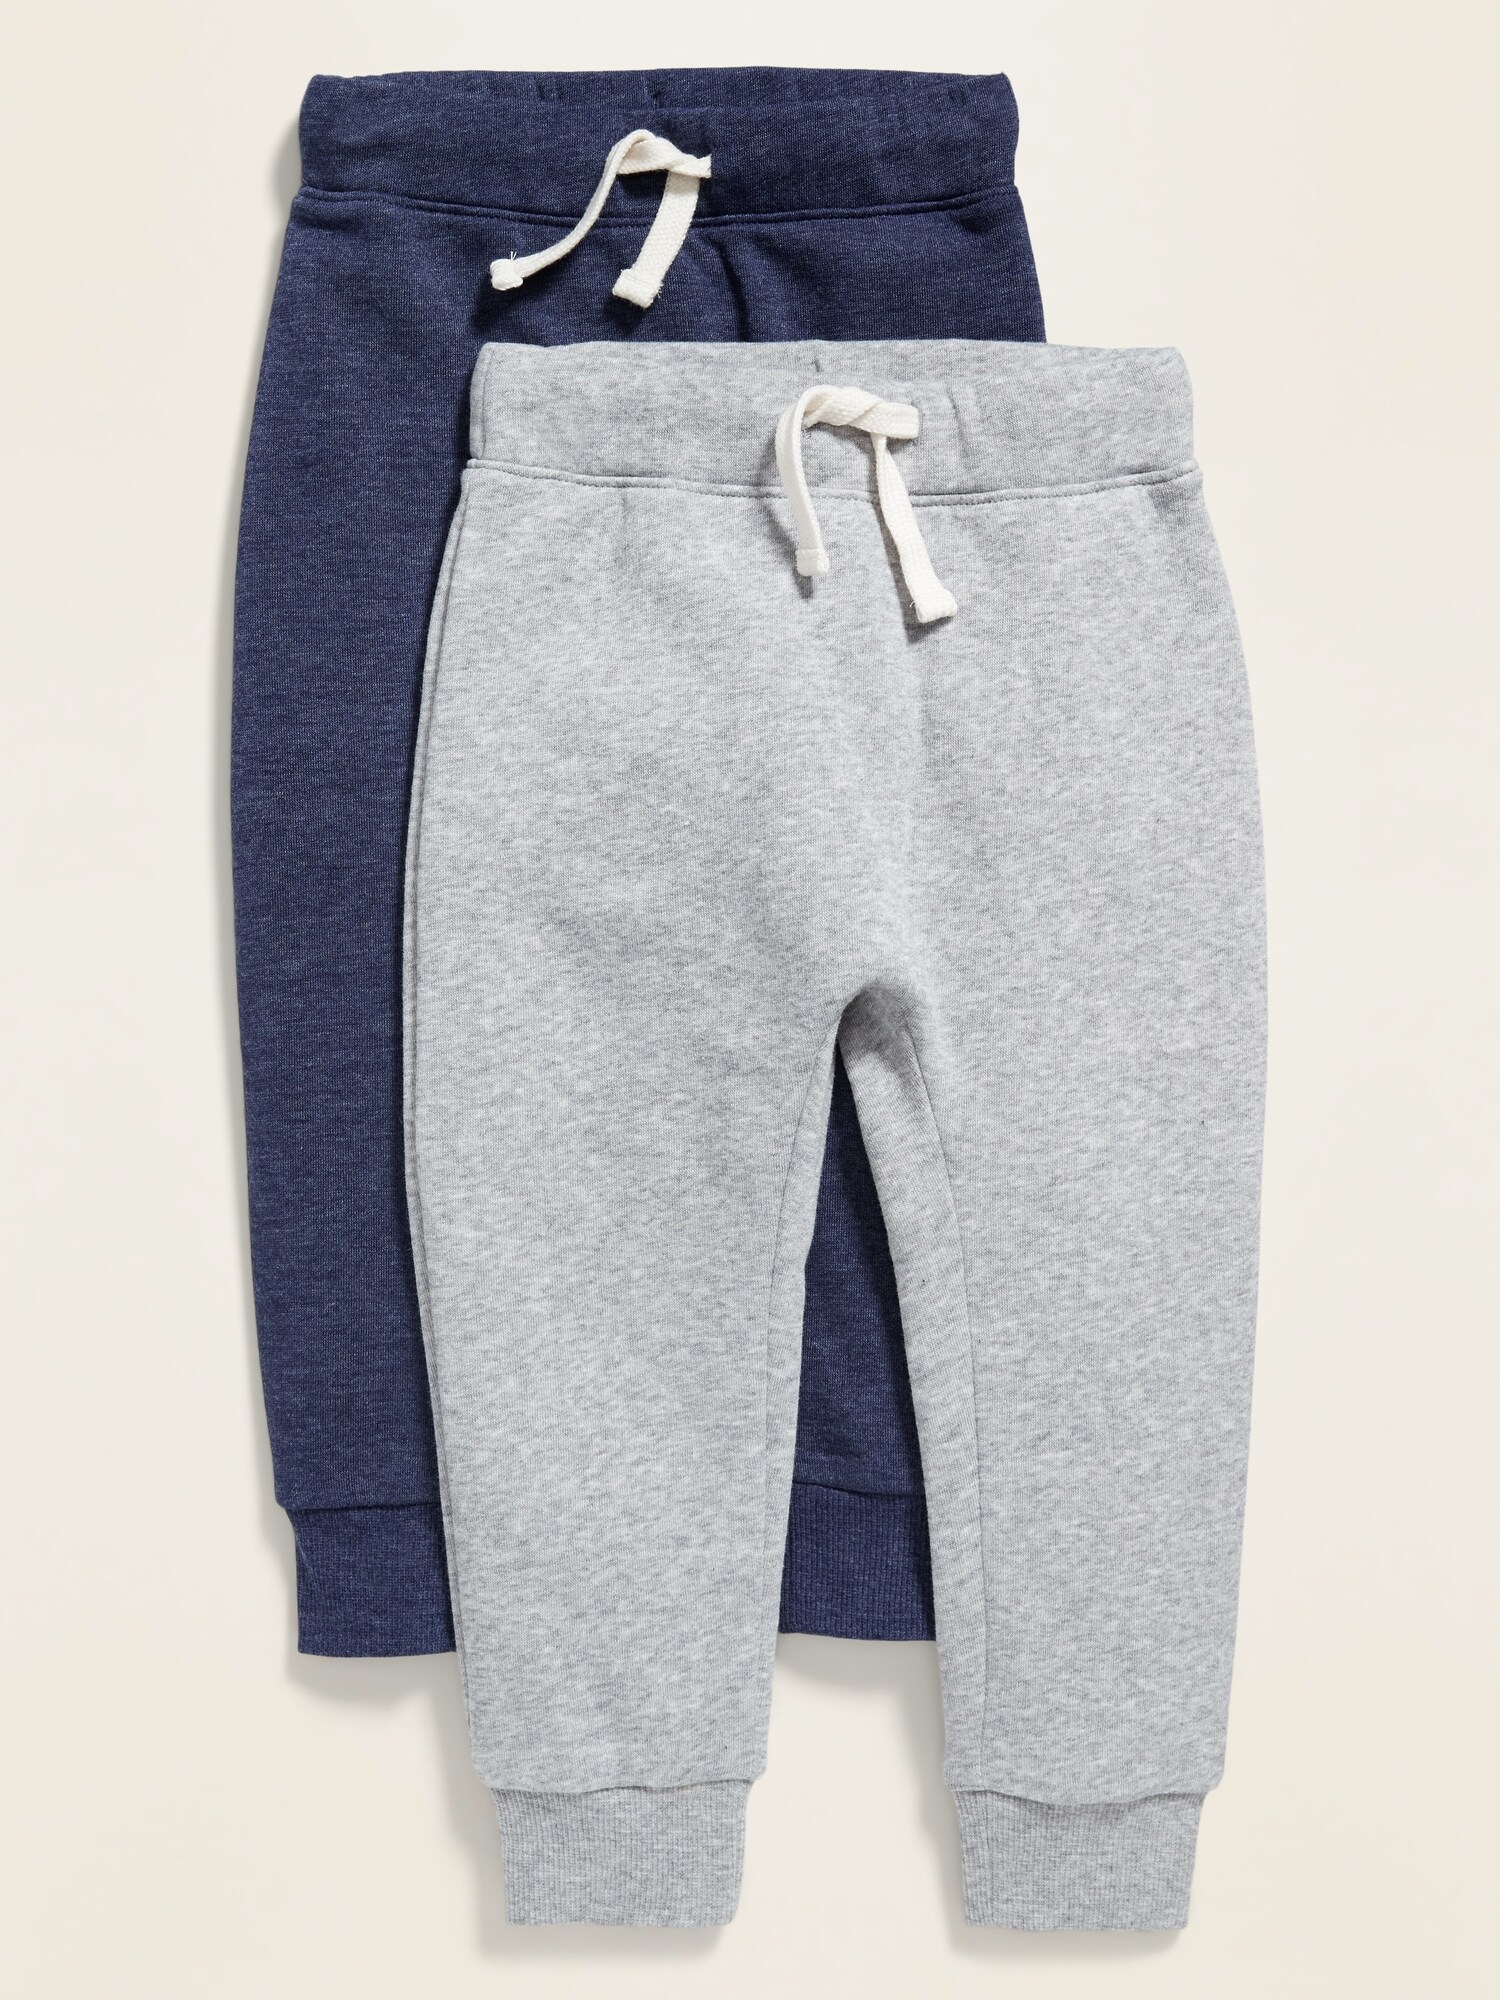 Functional-Drawstring Sweatpants 2-Pack for Toddler Boys | Old Navy